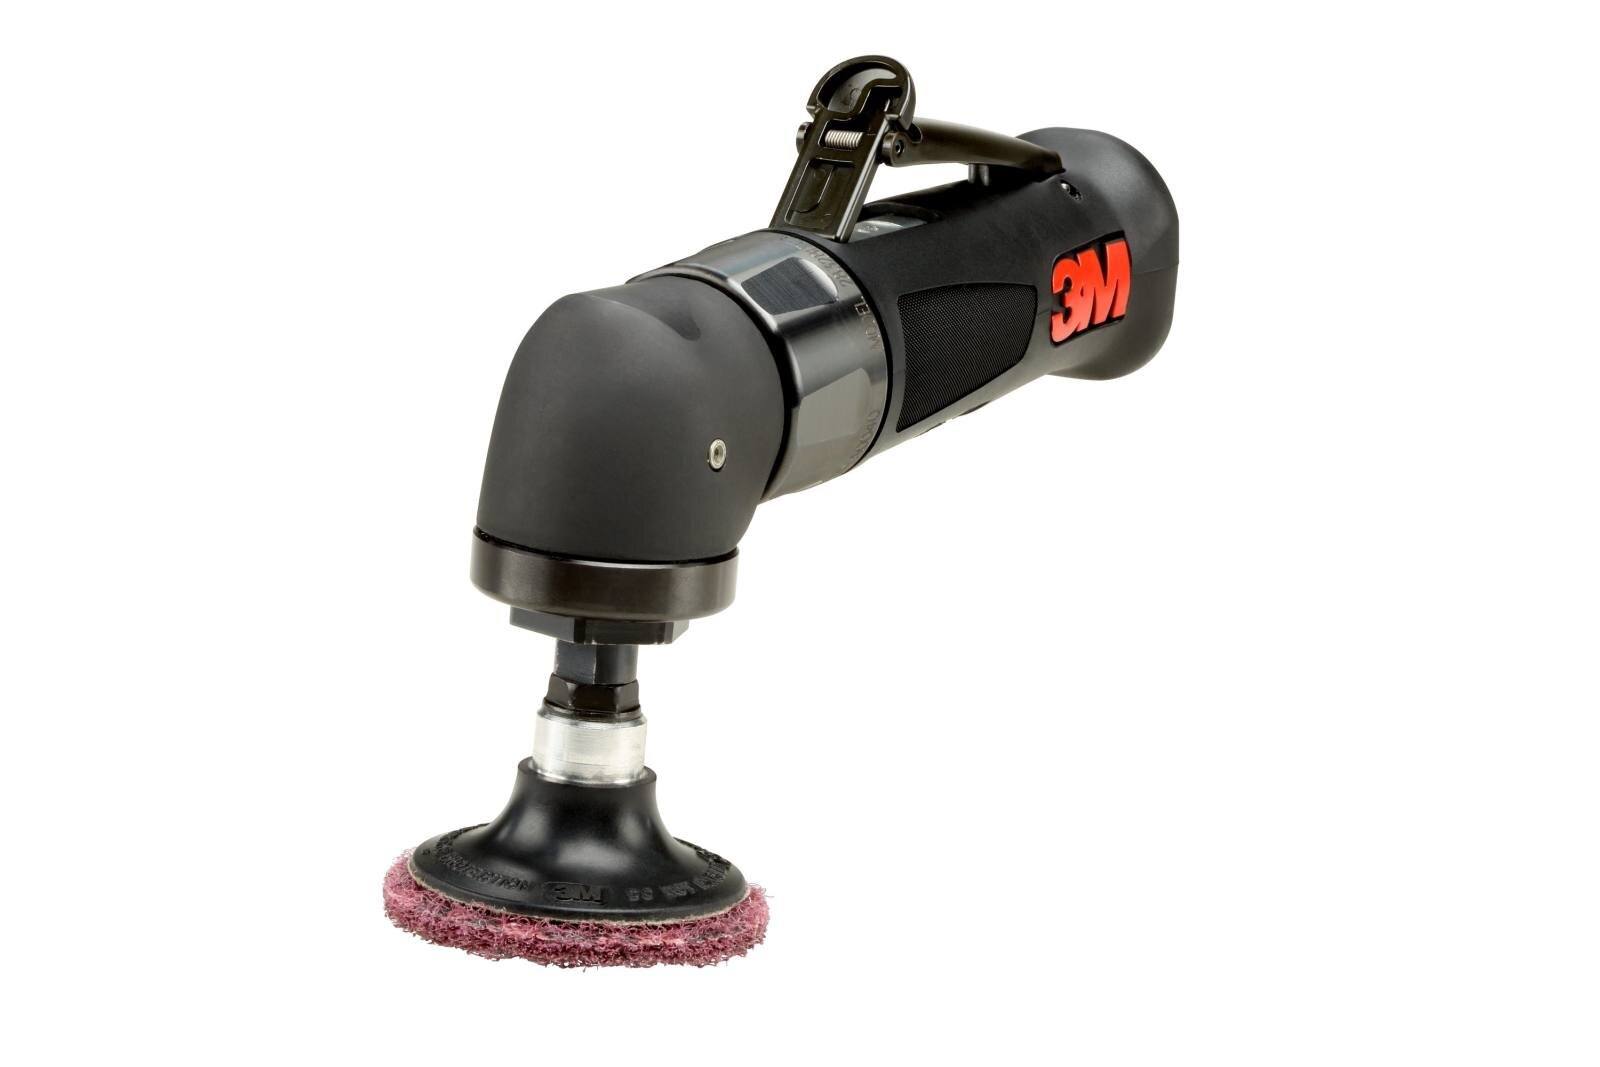 3M Roloc Pneumatic angle grinder 2nd generation, 76 mm, 0.3 hp, 12,000 rpm, 6 mm collet chuck